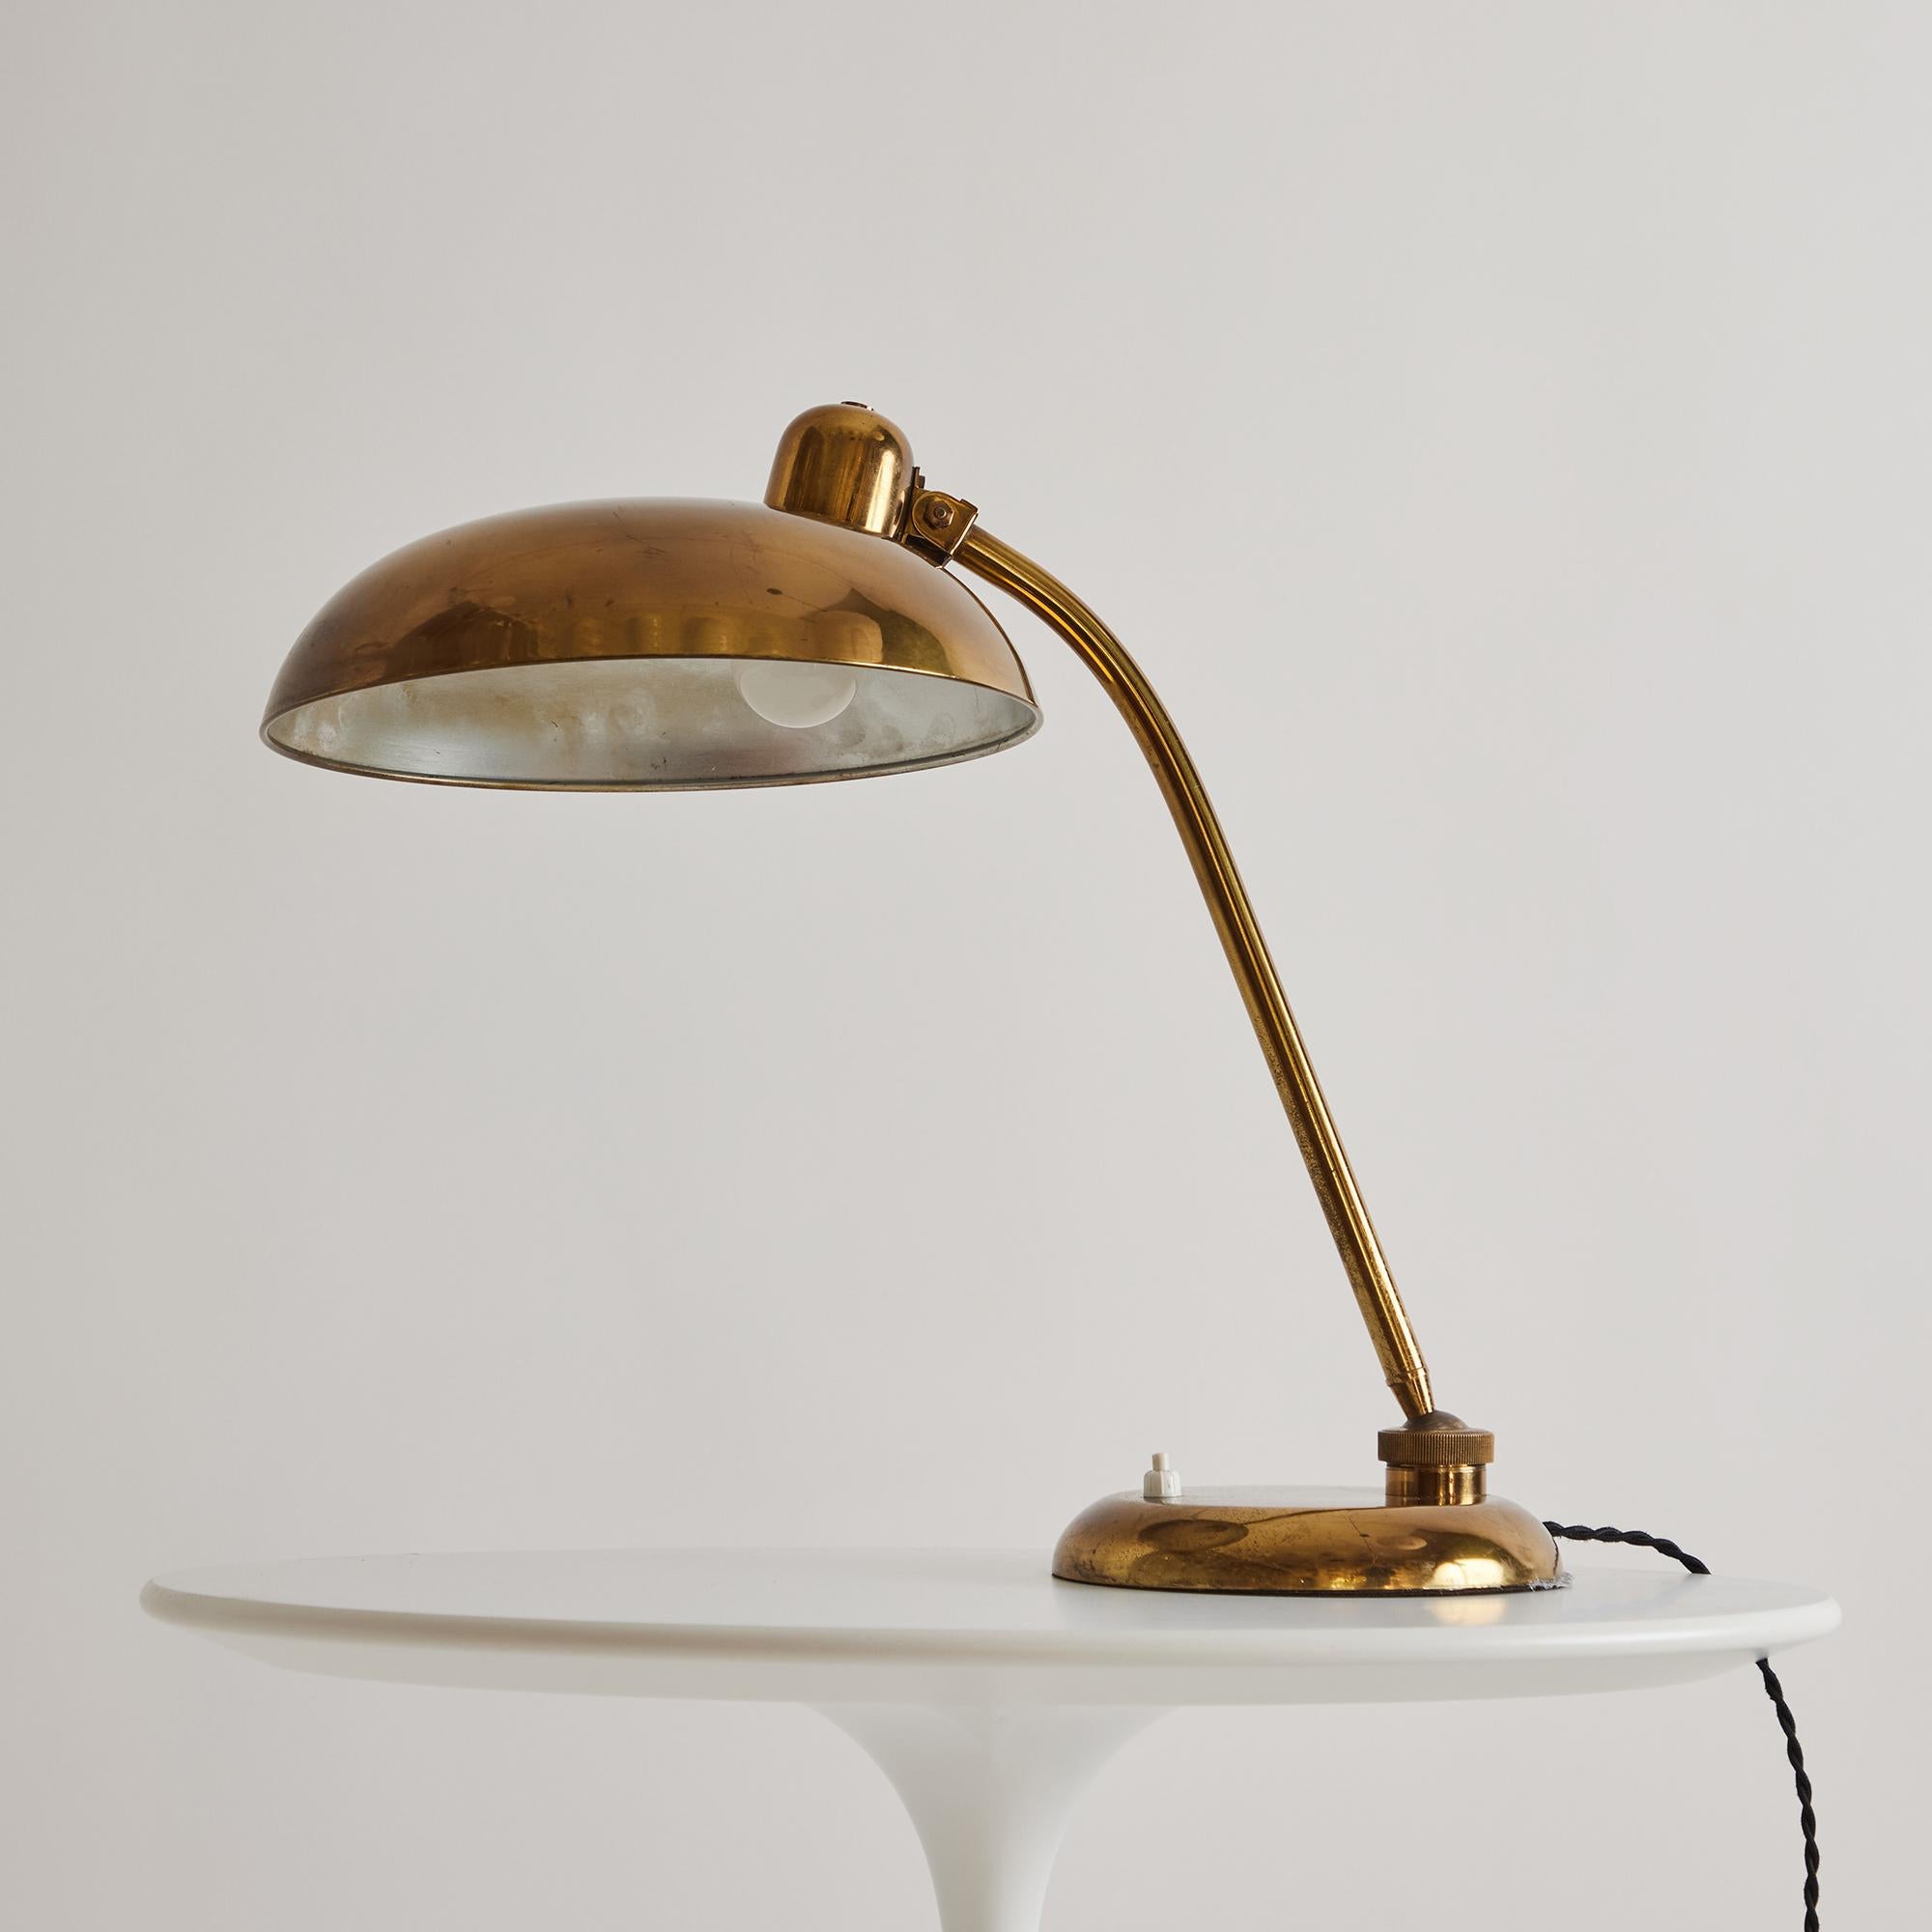 1940s Giovanni Michelucci Patinated Brass Ministerial Table Lamp for Lariolux For Sale 5